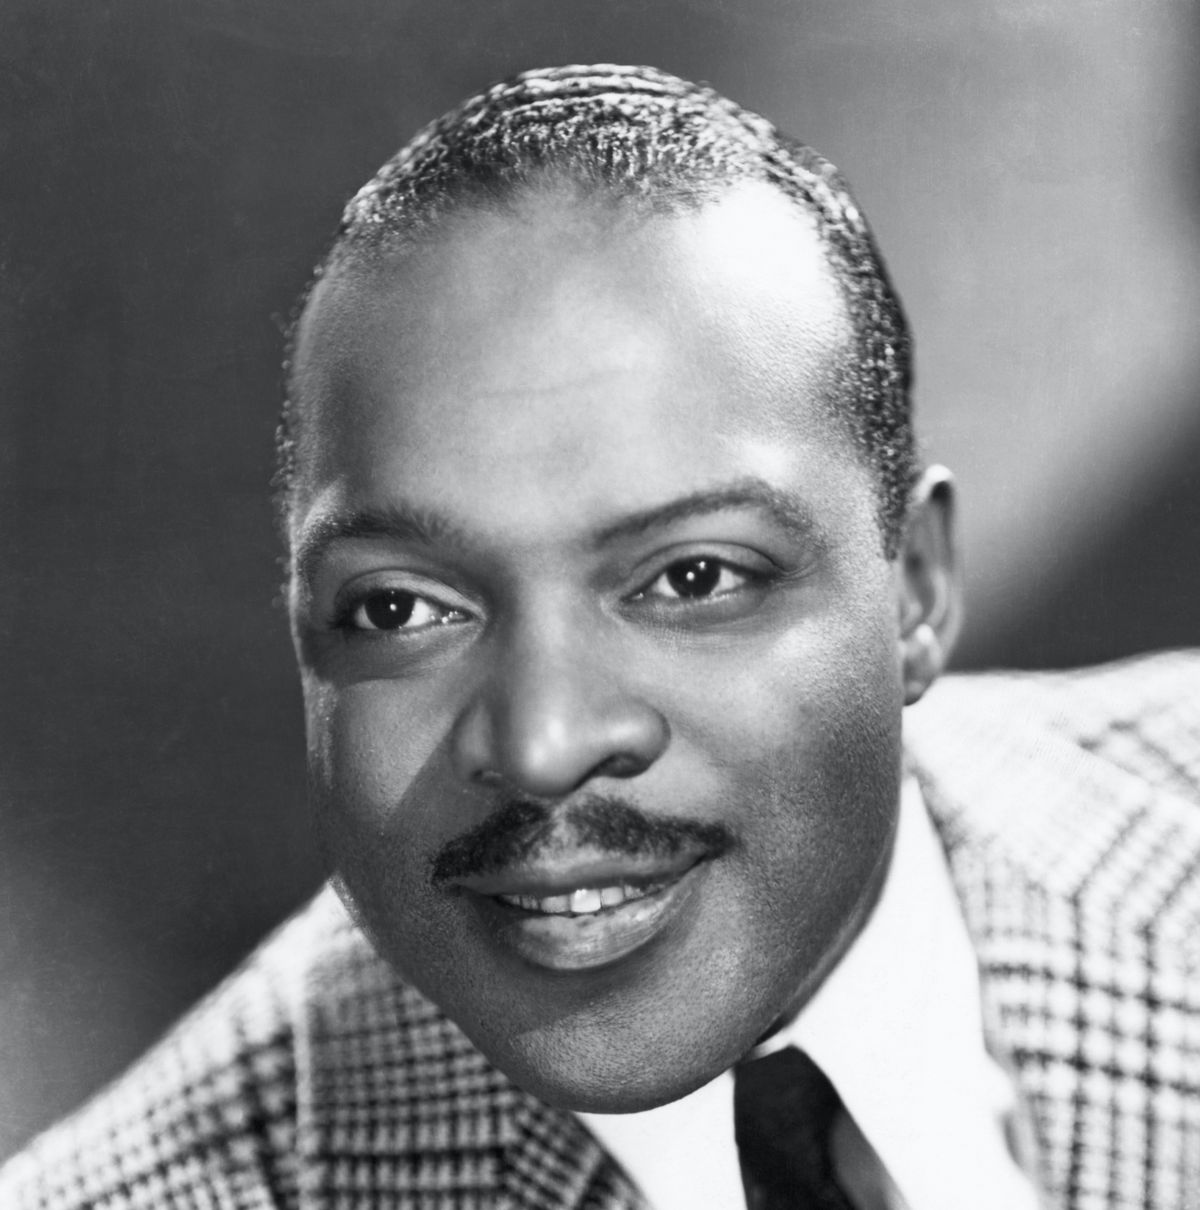 Count Basie Songs, Band & Facts